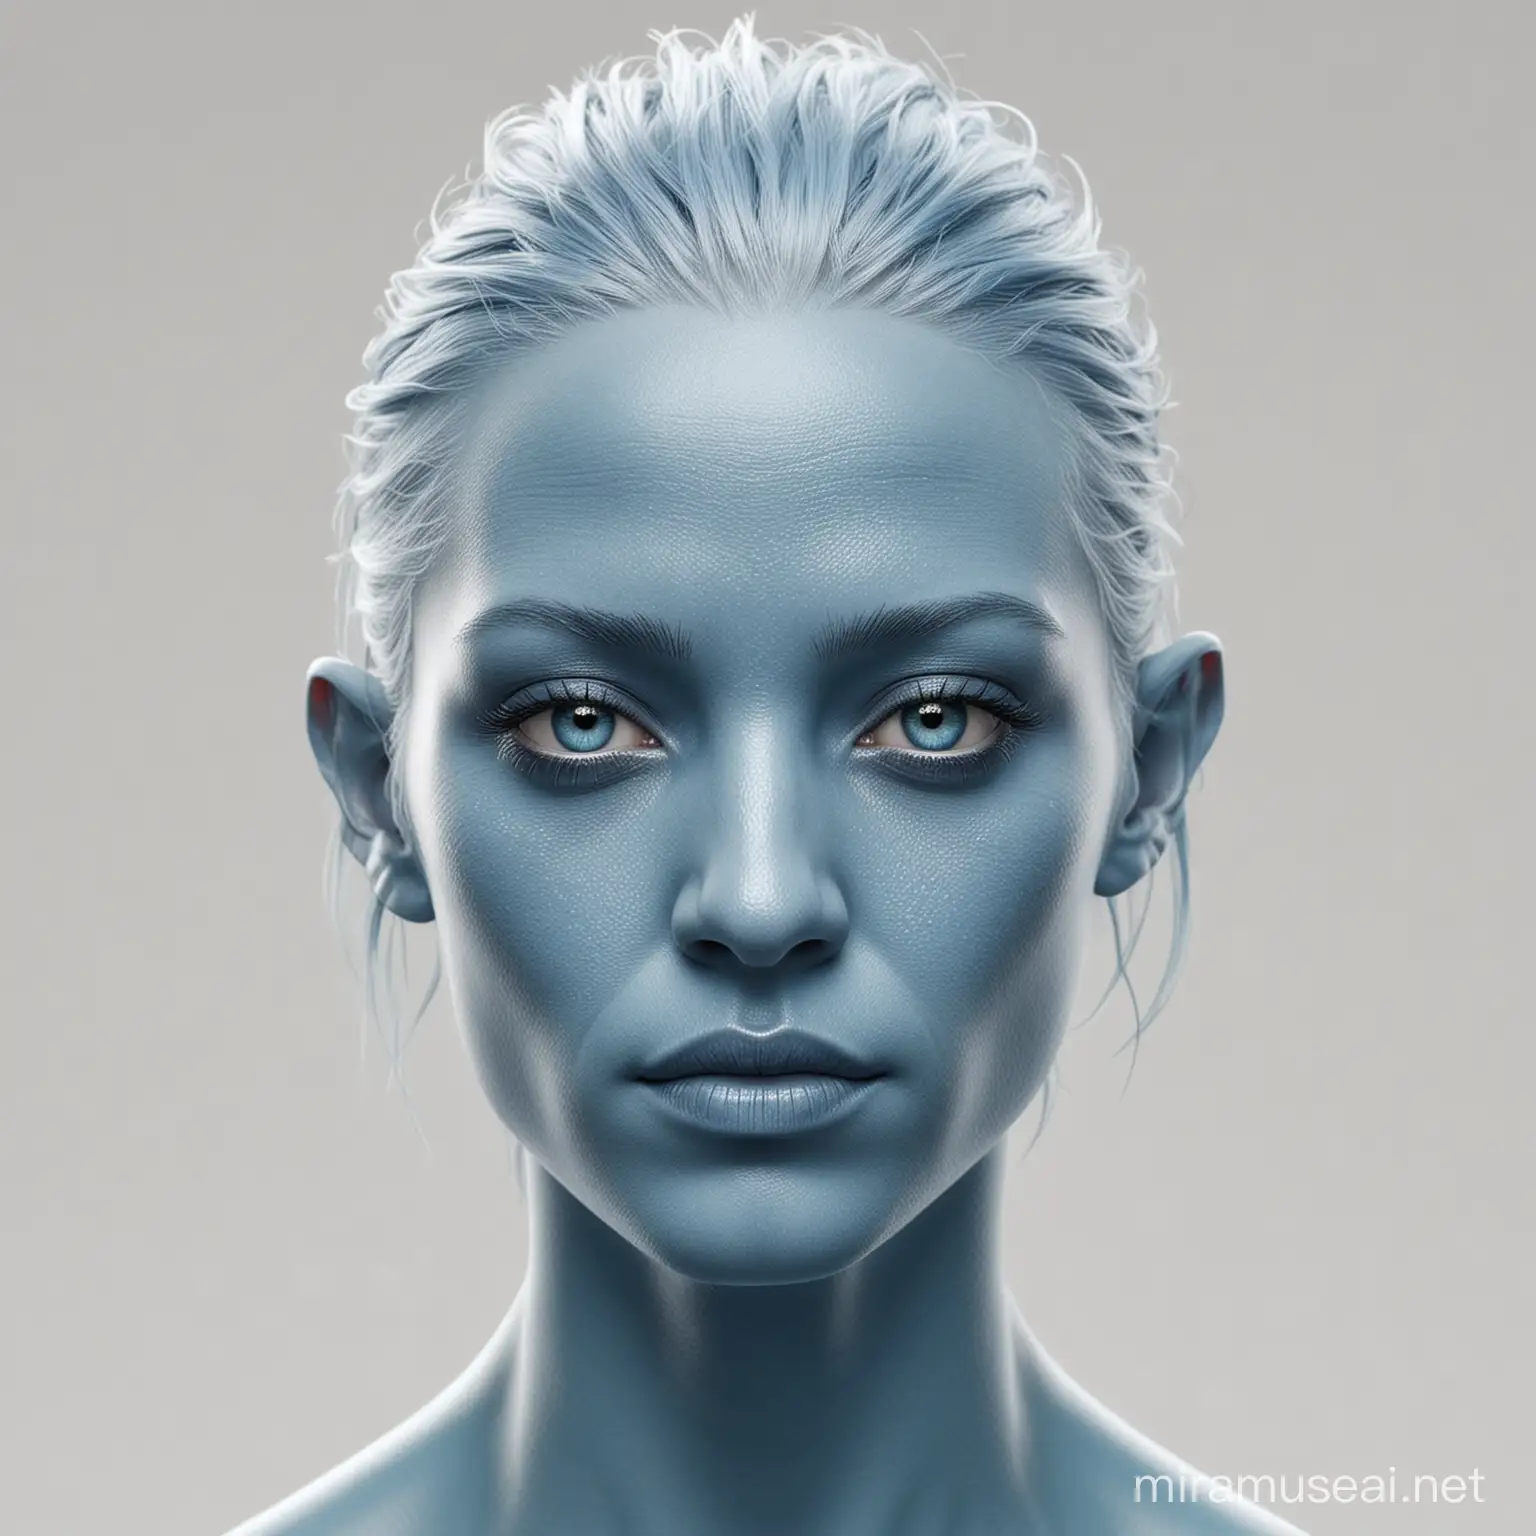 Blue Skinned Avatar Person Portrait on White Background